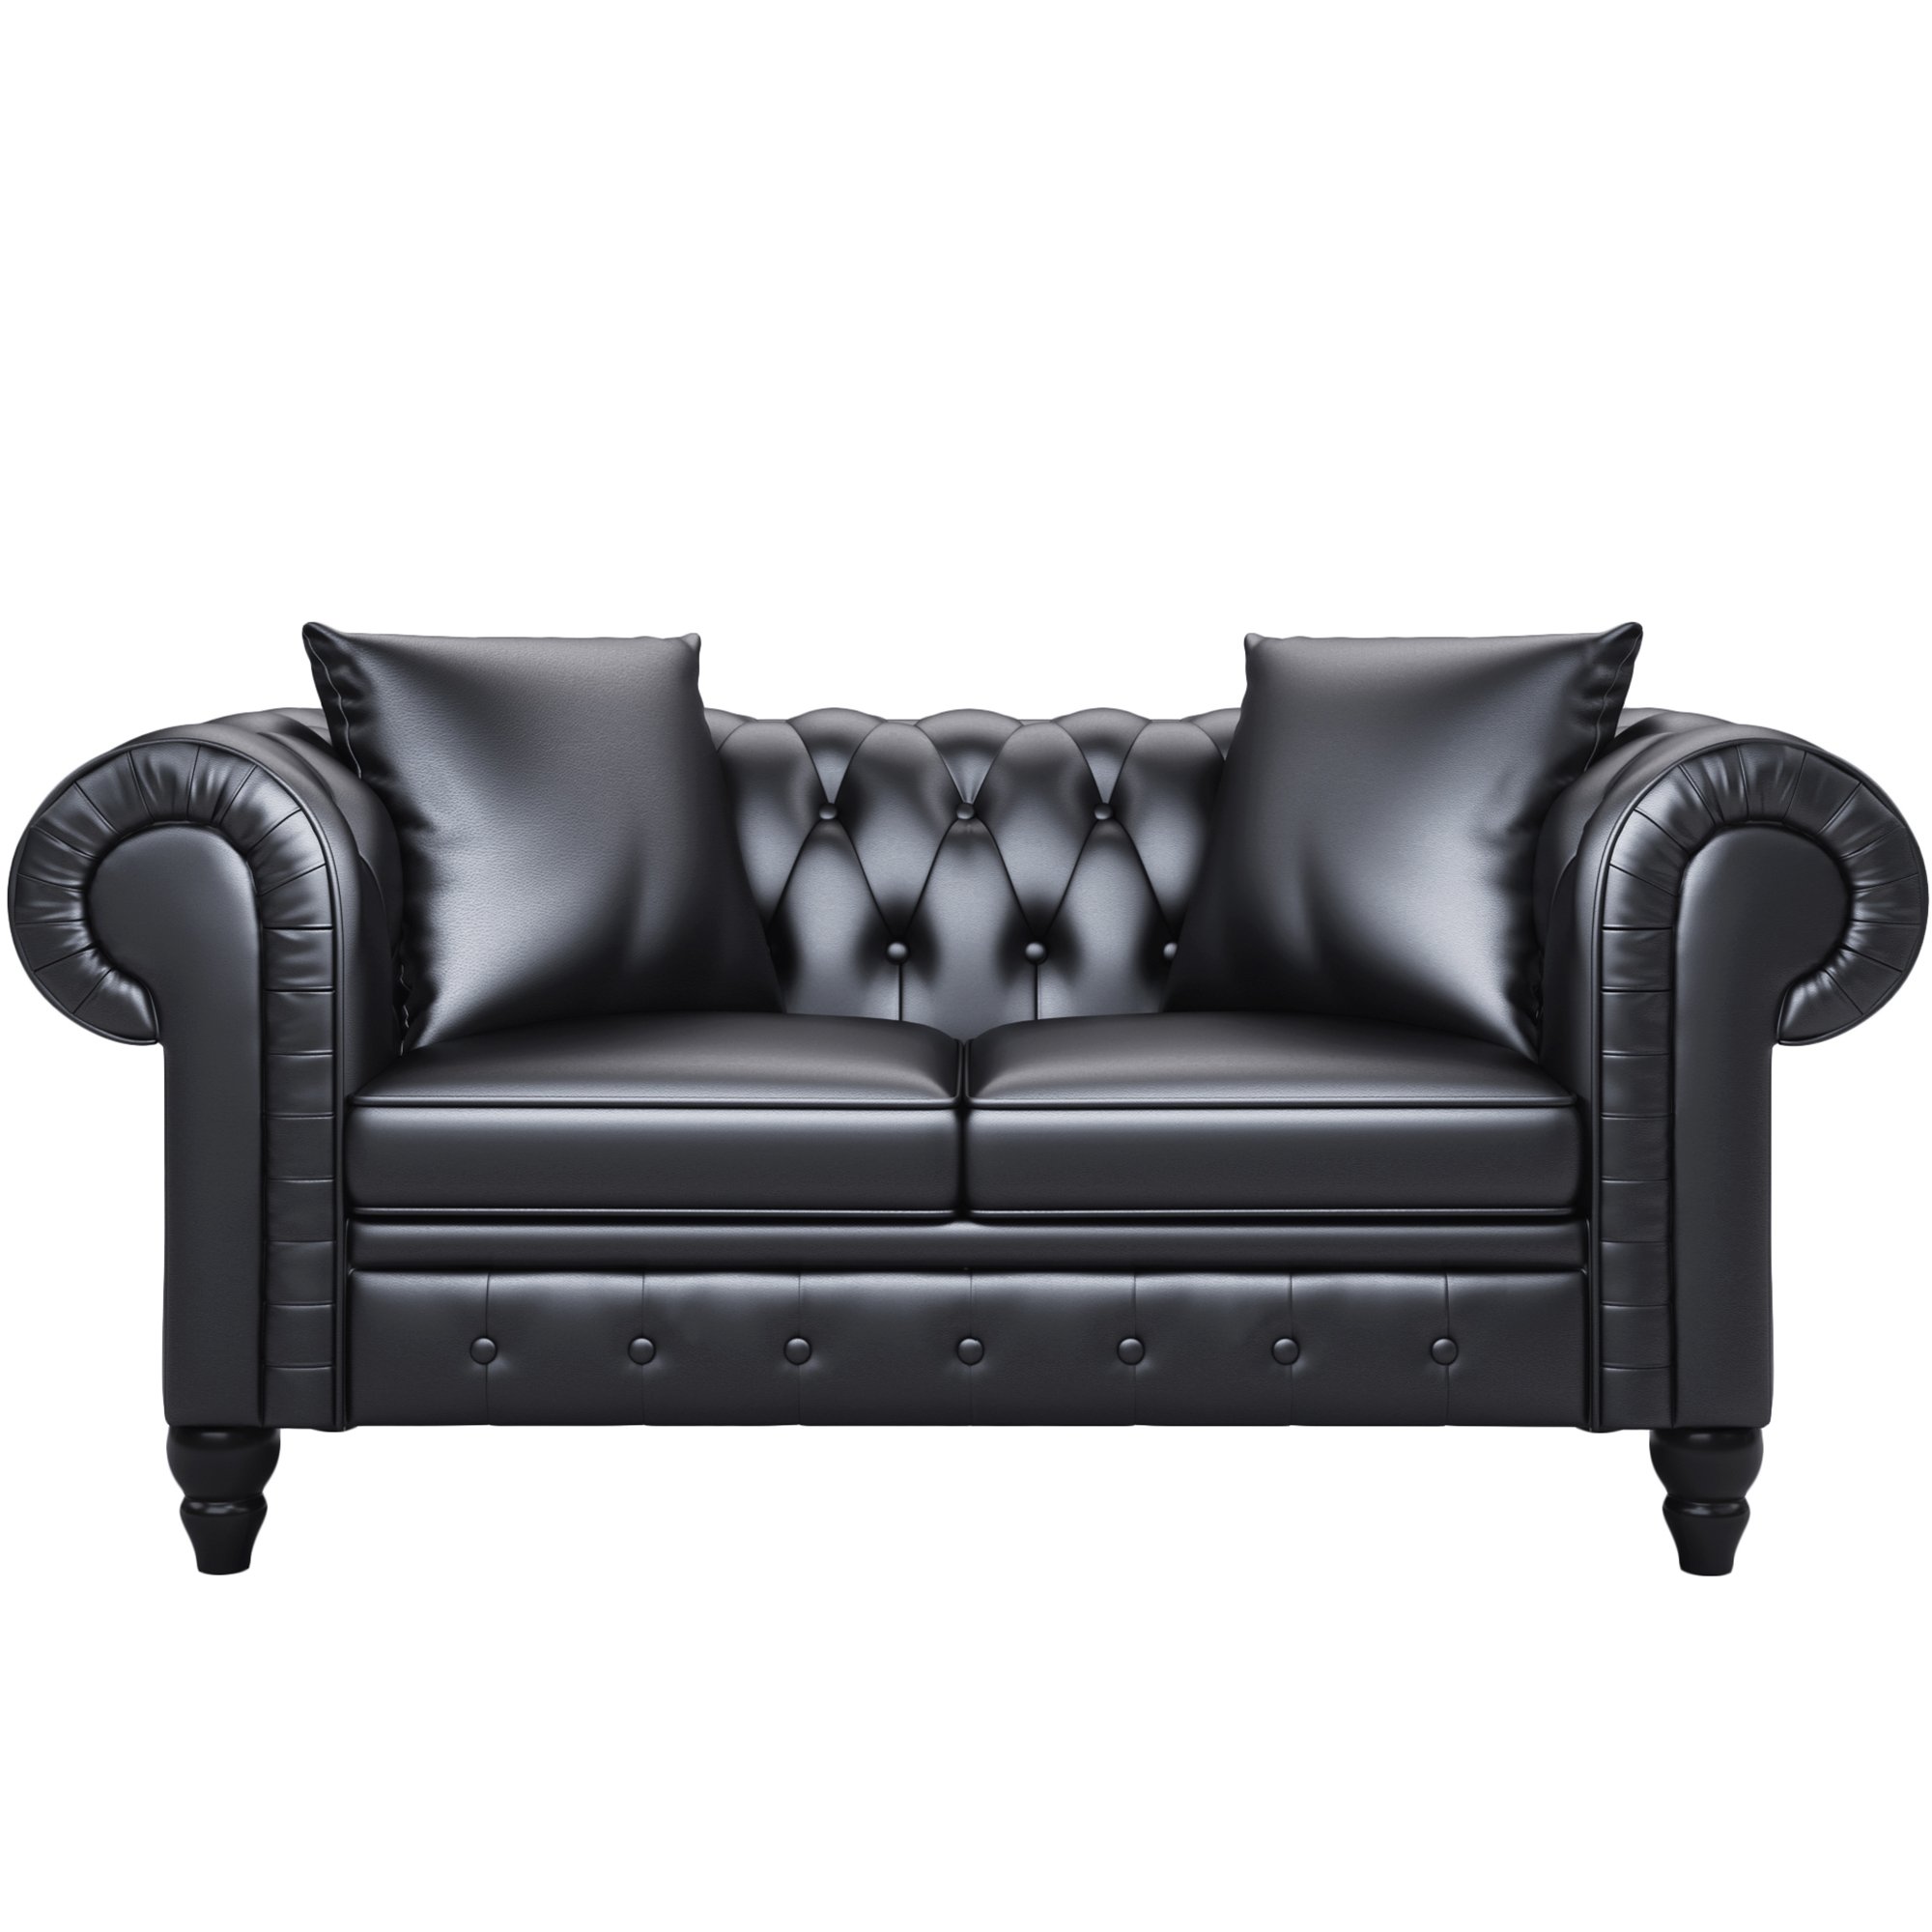 63" Deep Button Tufted PU leather Upholstered Loveseat Sofa Classic Chesterfield Sofa Set,2 Pillows included-CASAINC